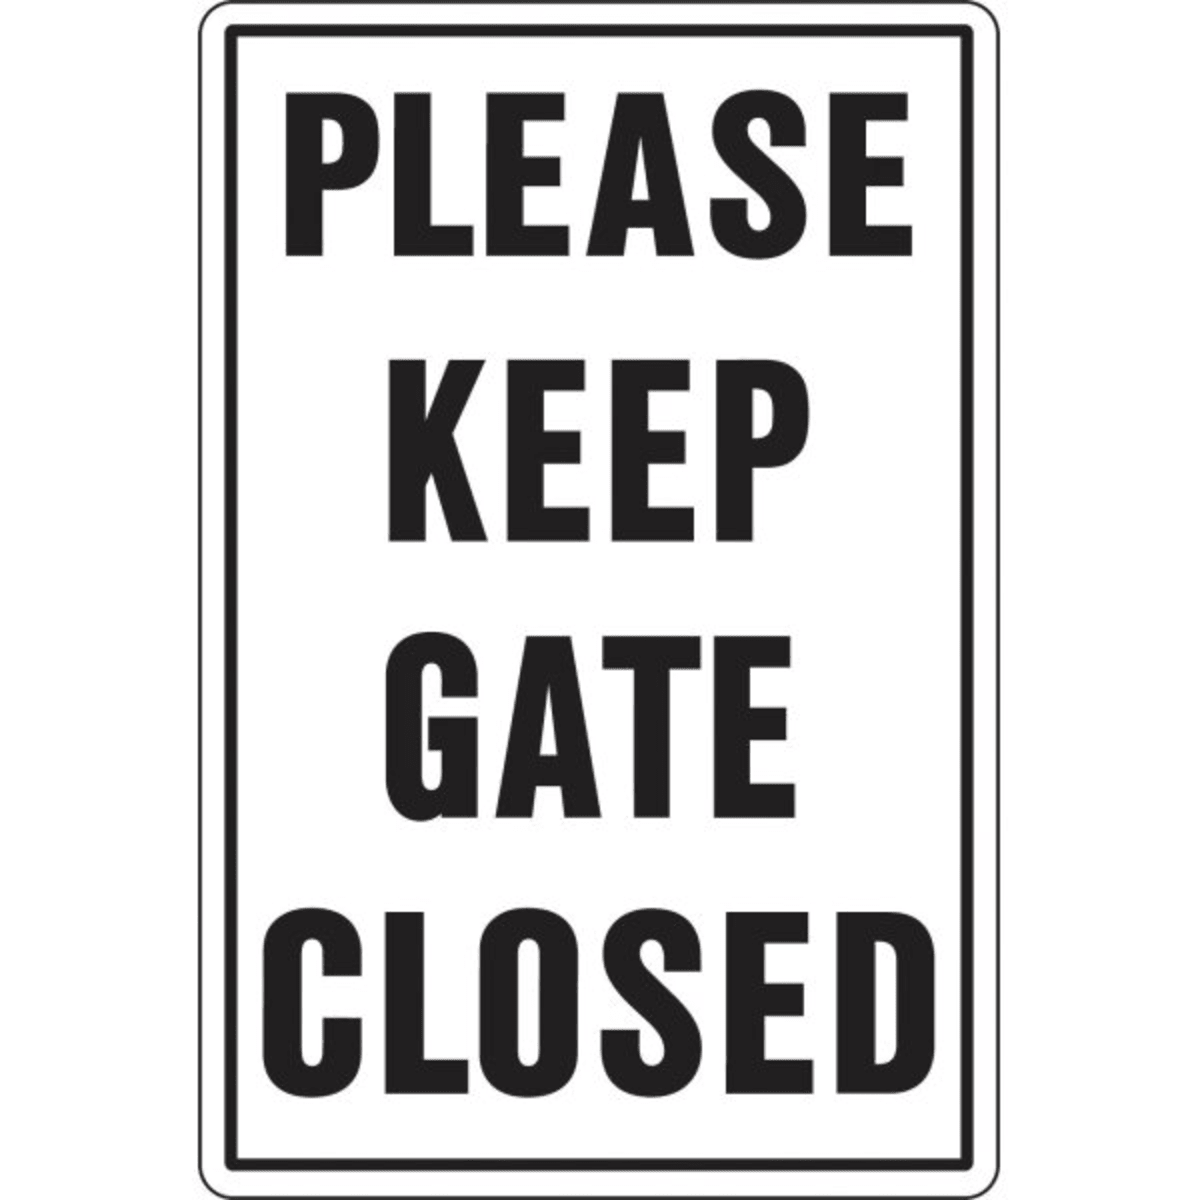 PLEASE KEEP GATE CLOSED ALUMINUM METAL SIGN MOUNTING HOLES 3 SIZES AVAILABLE